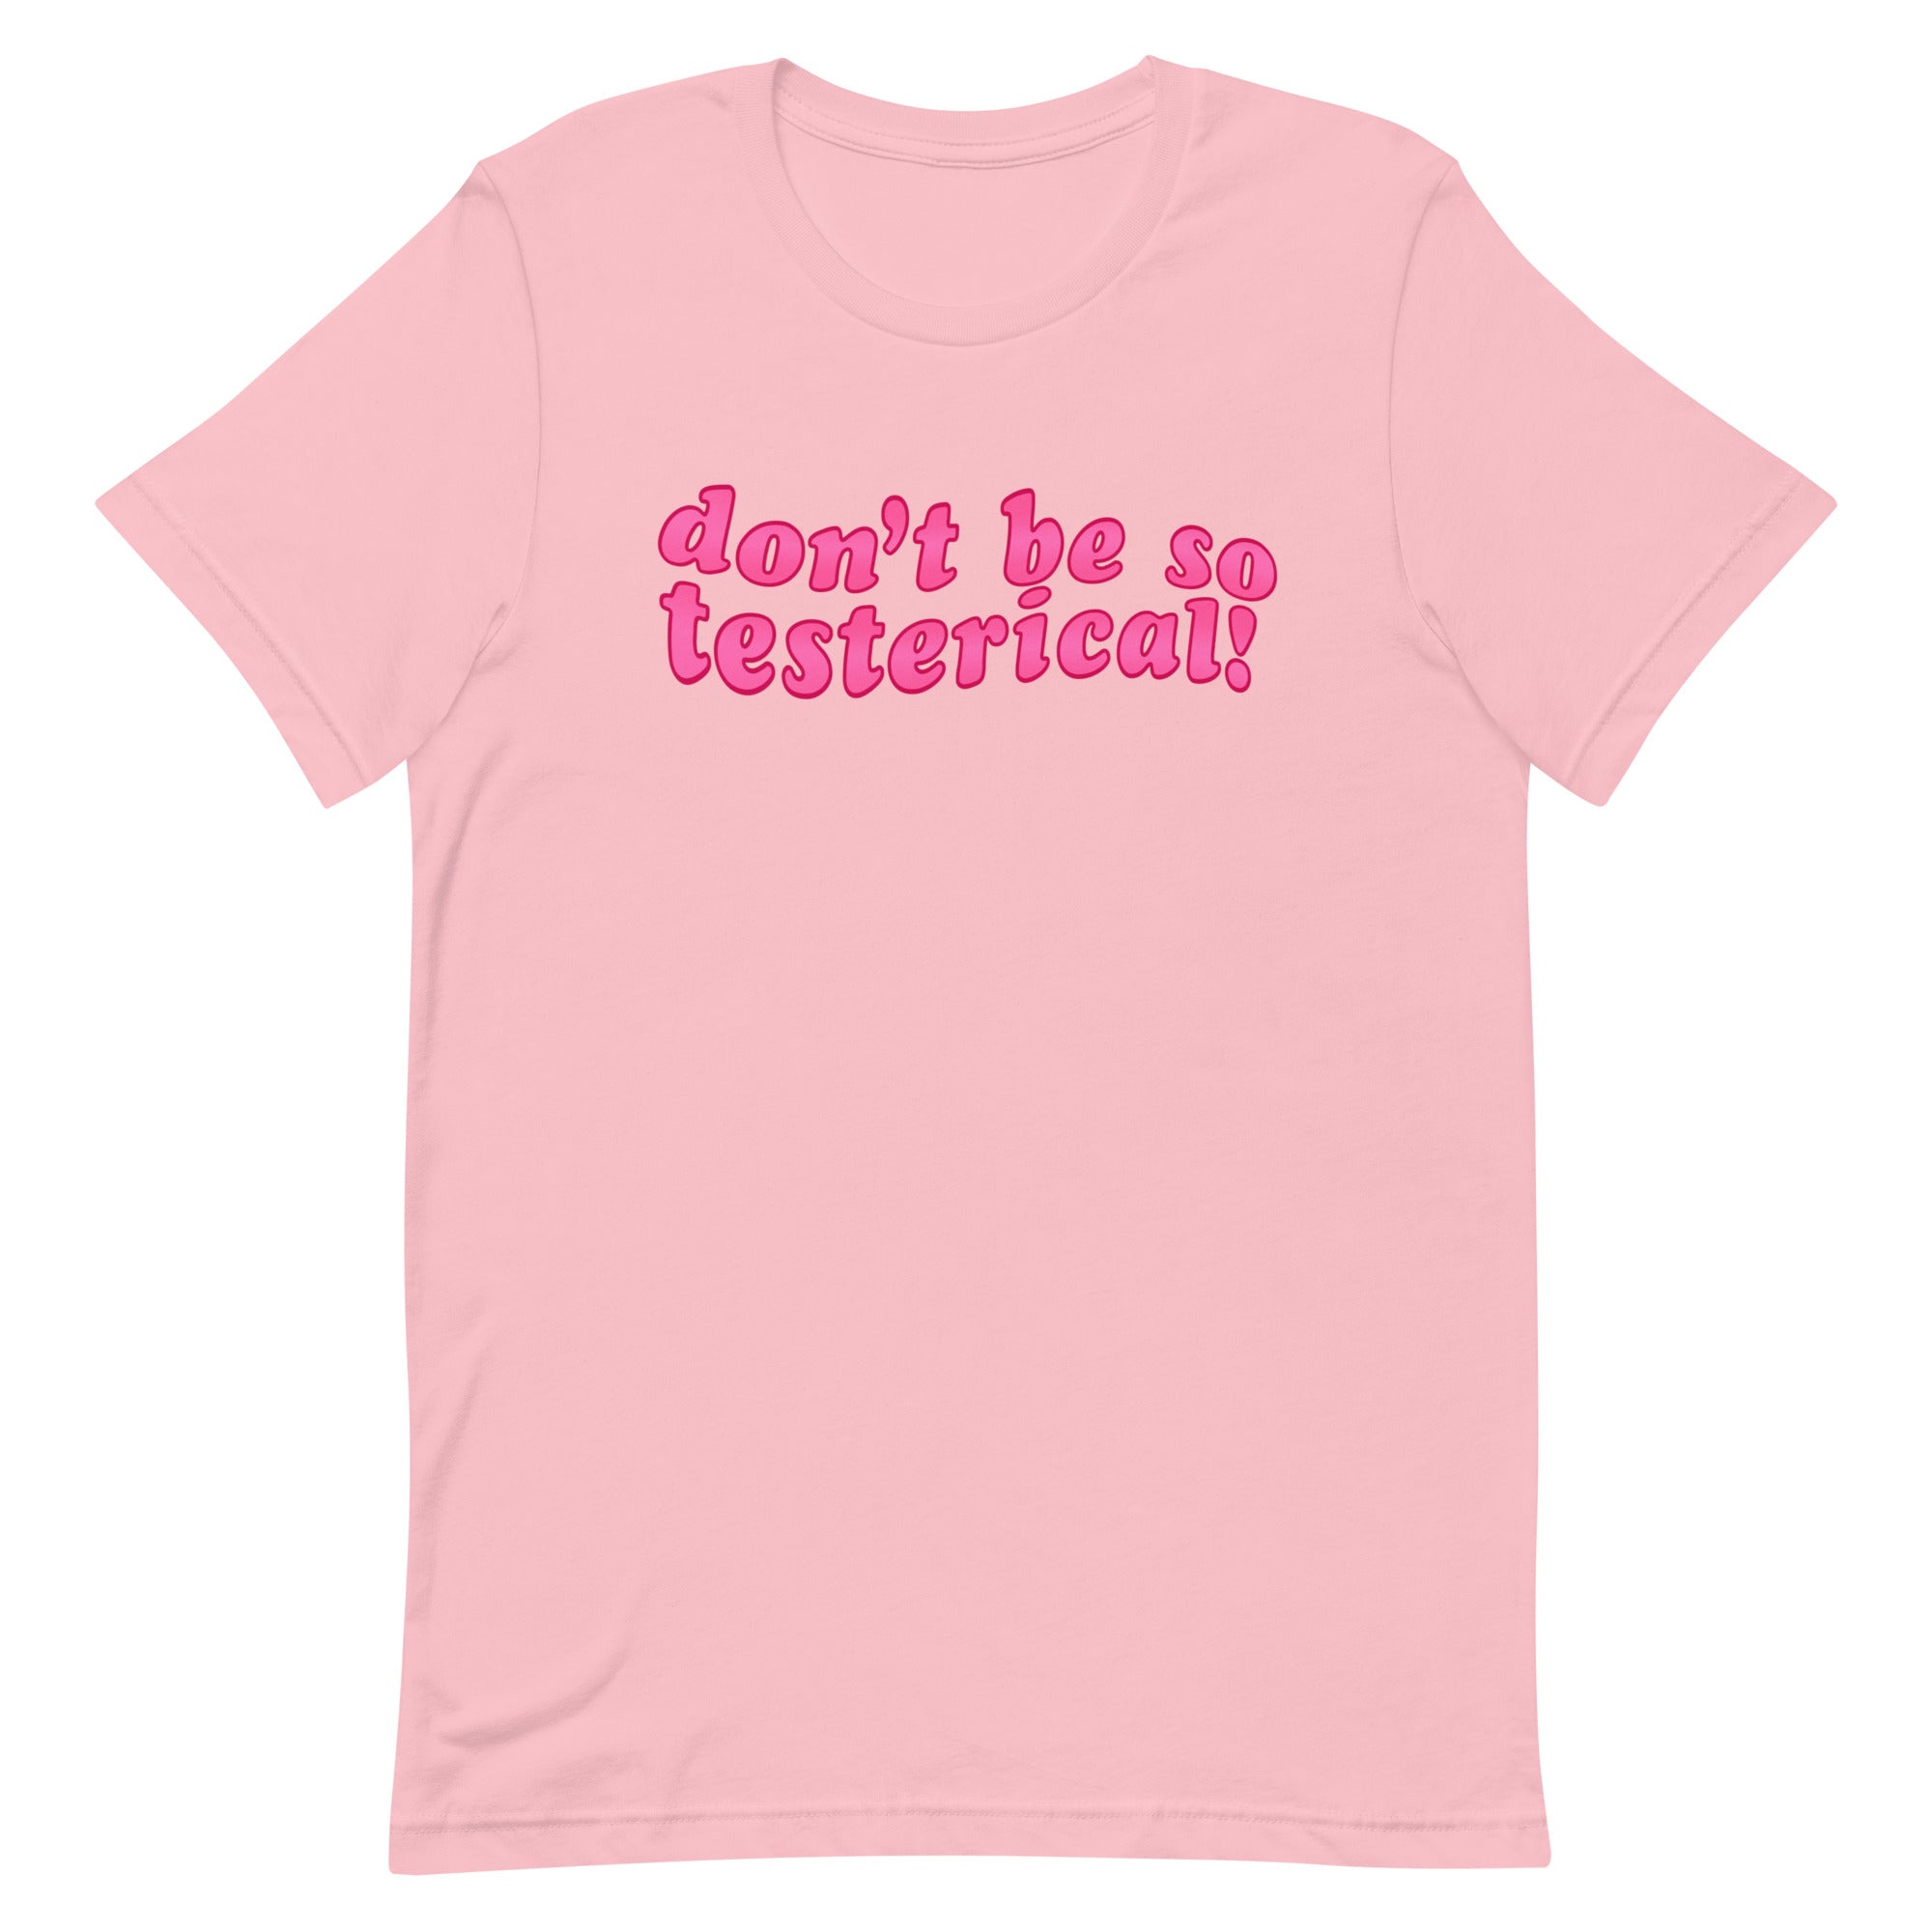 Don’t Be So Testerical! Unisex Feminist T-shirt - Shop Women’s Rights T-shirts - Feminist Trash Store - Pink